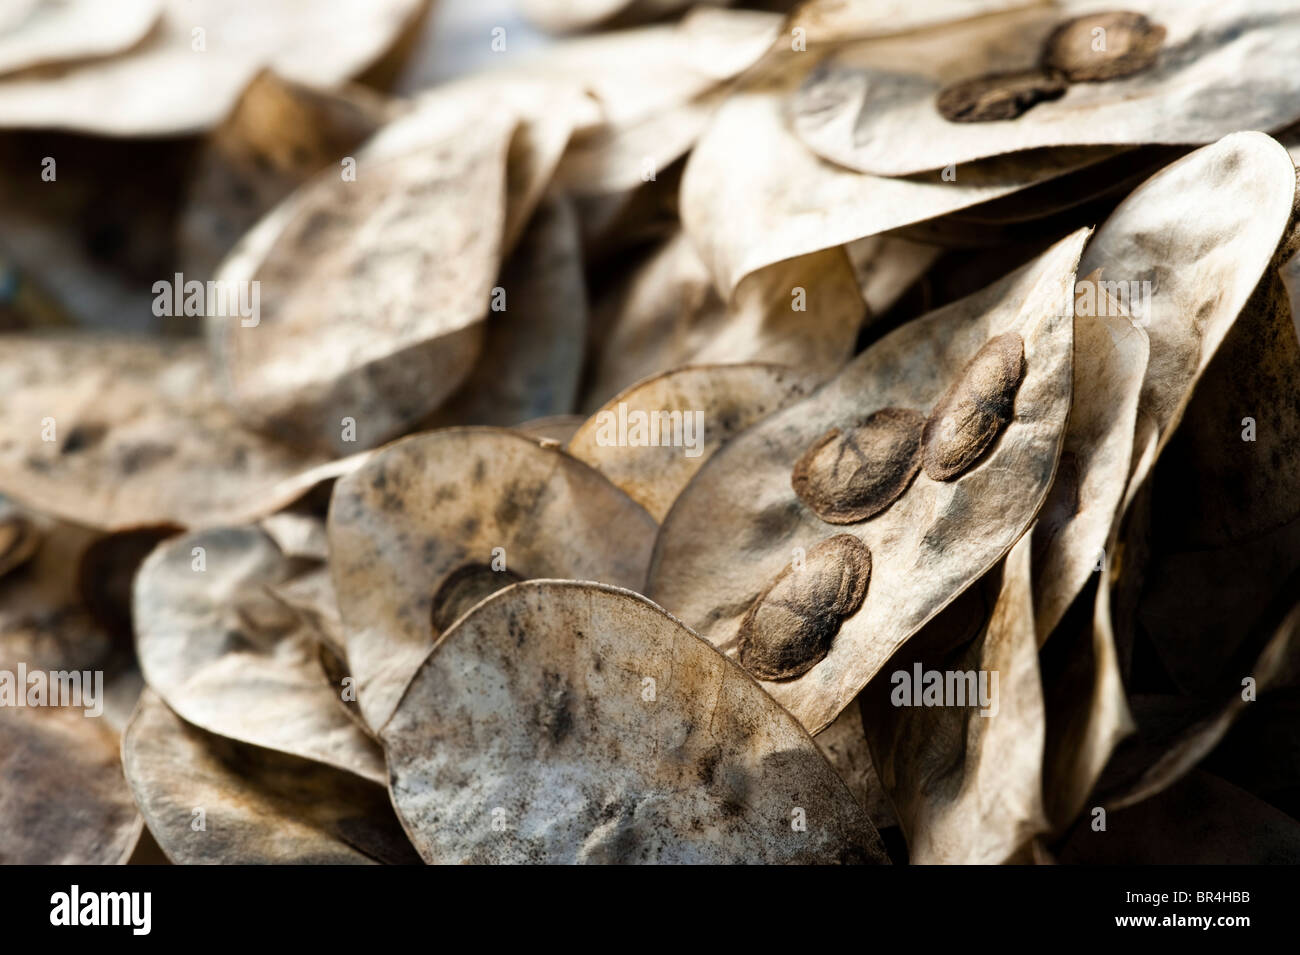 Annual Honesty, Lunaria annua, seeds and their seed pods Stock Photo